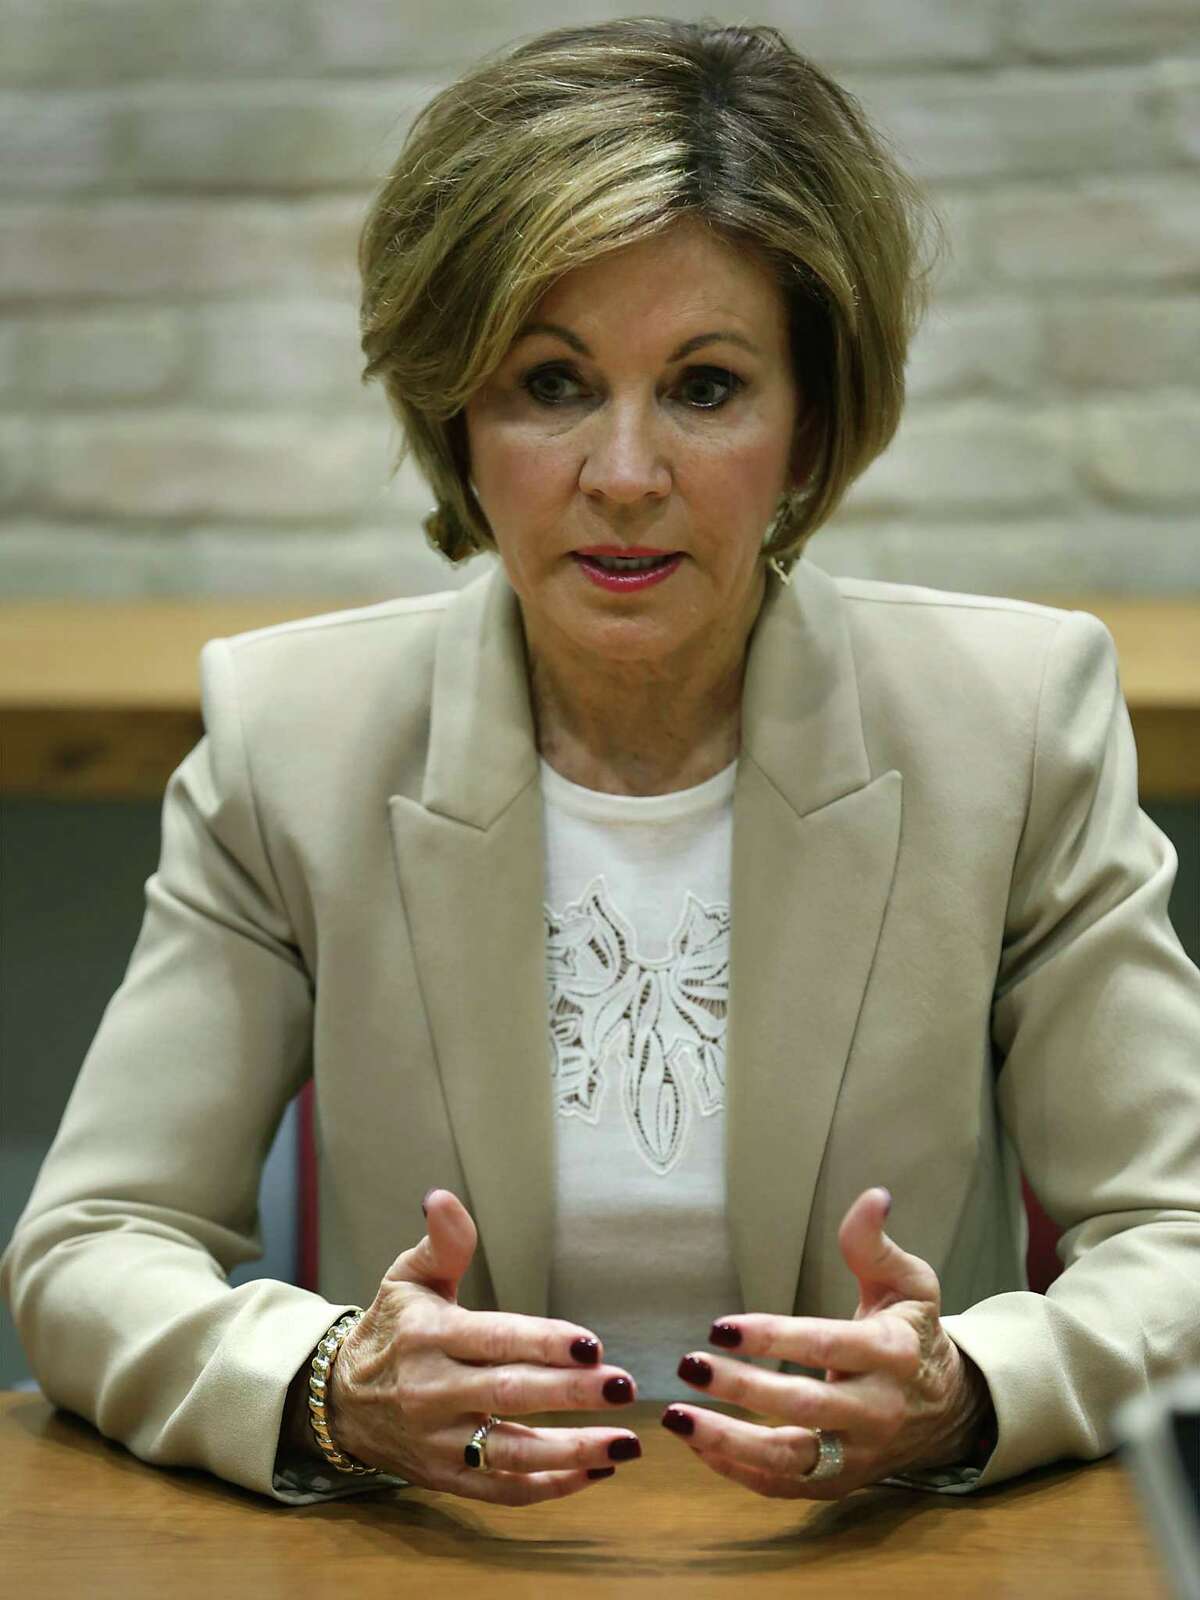 Proposition B was apparently motivated by frustration over San Antonio City Manager Sheryl Sculley, who announced her resignation on Nov. 29. But that is no reason to change our form of city government.